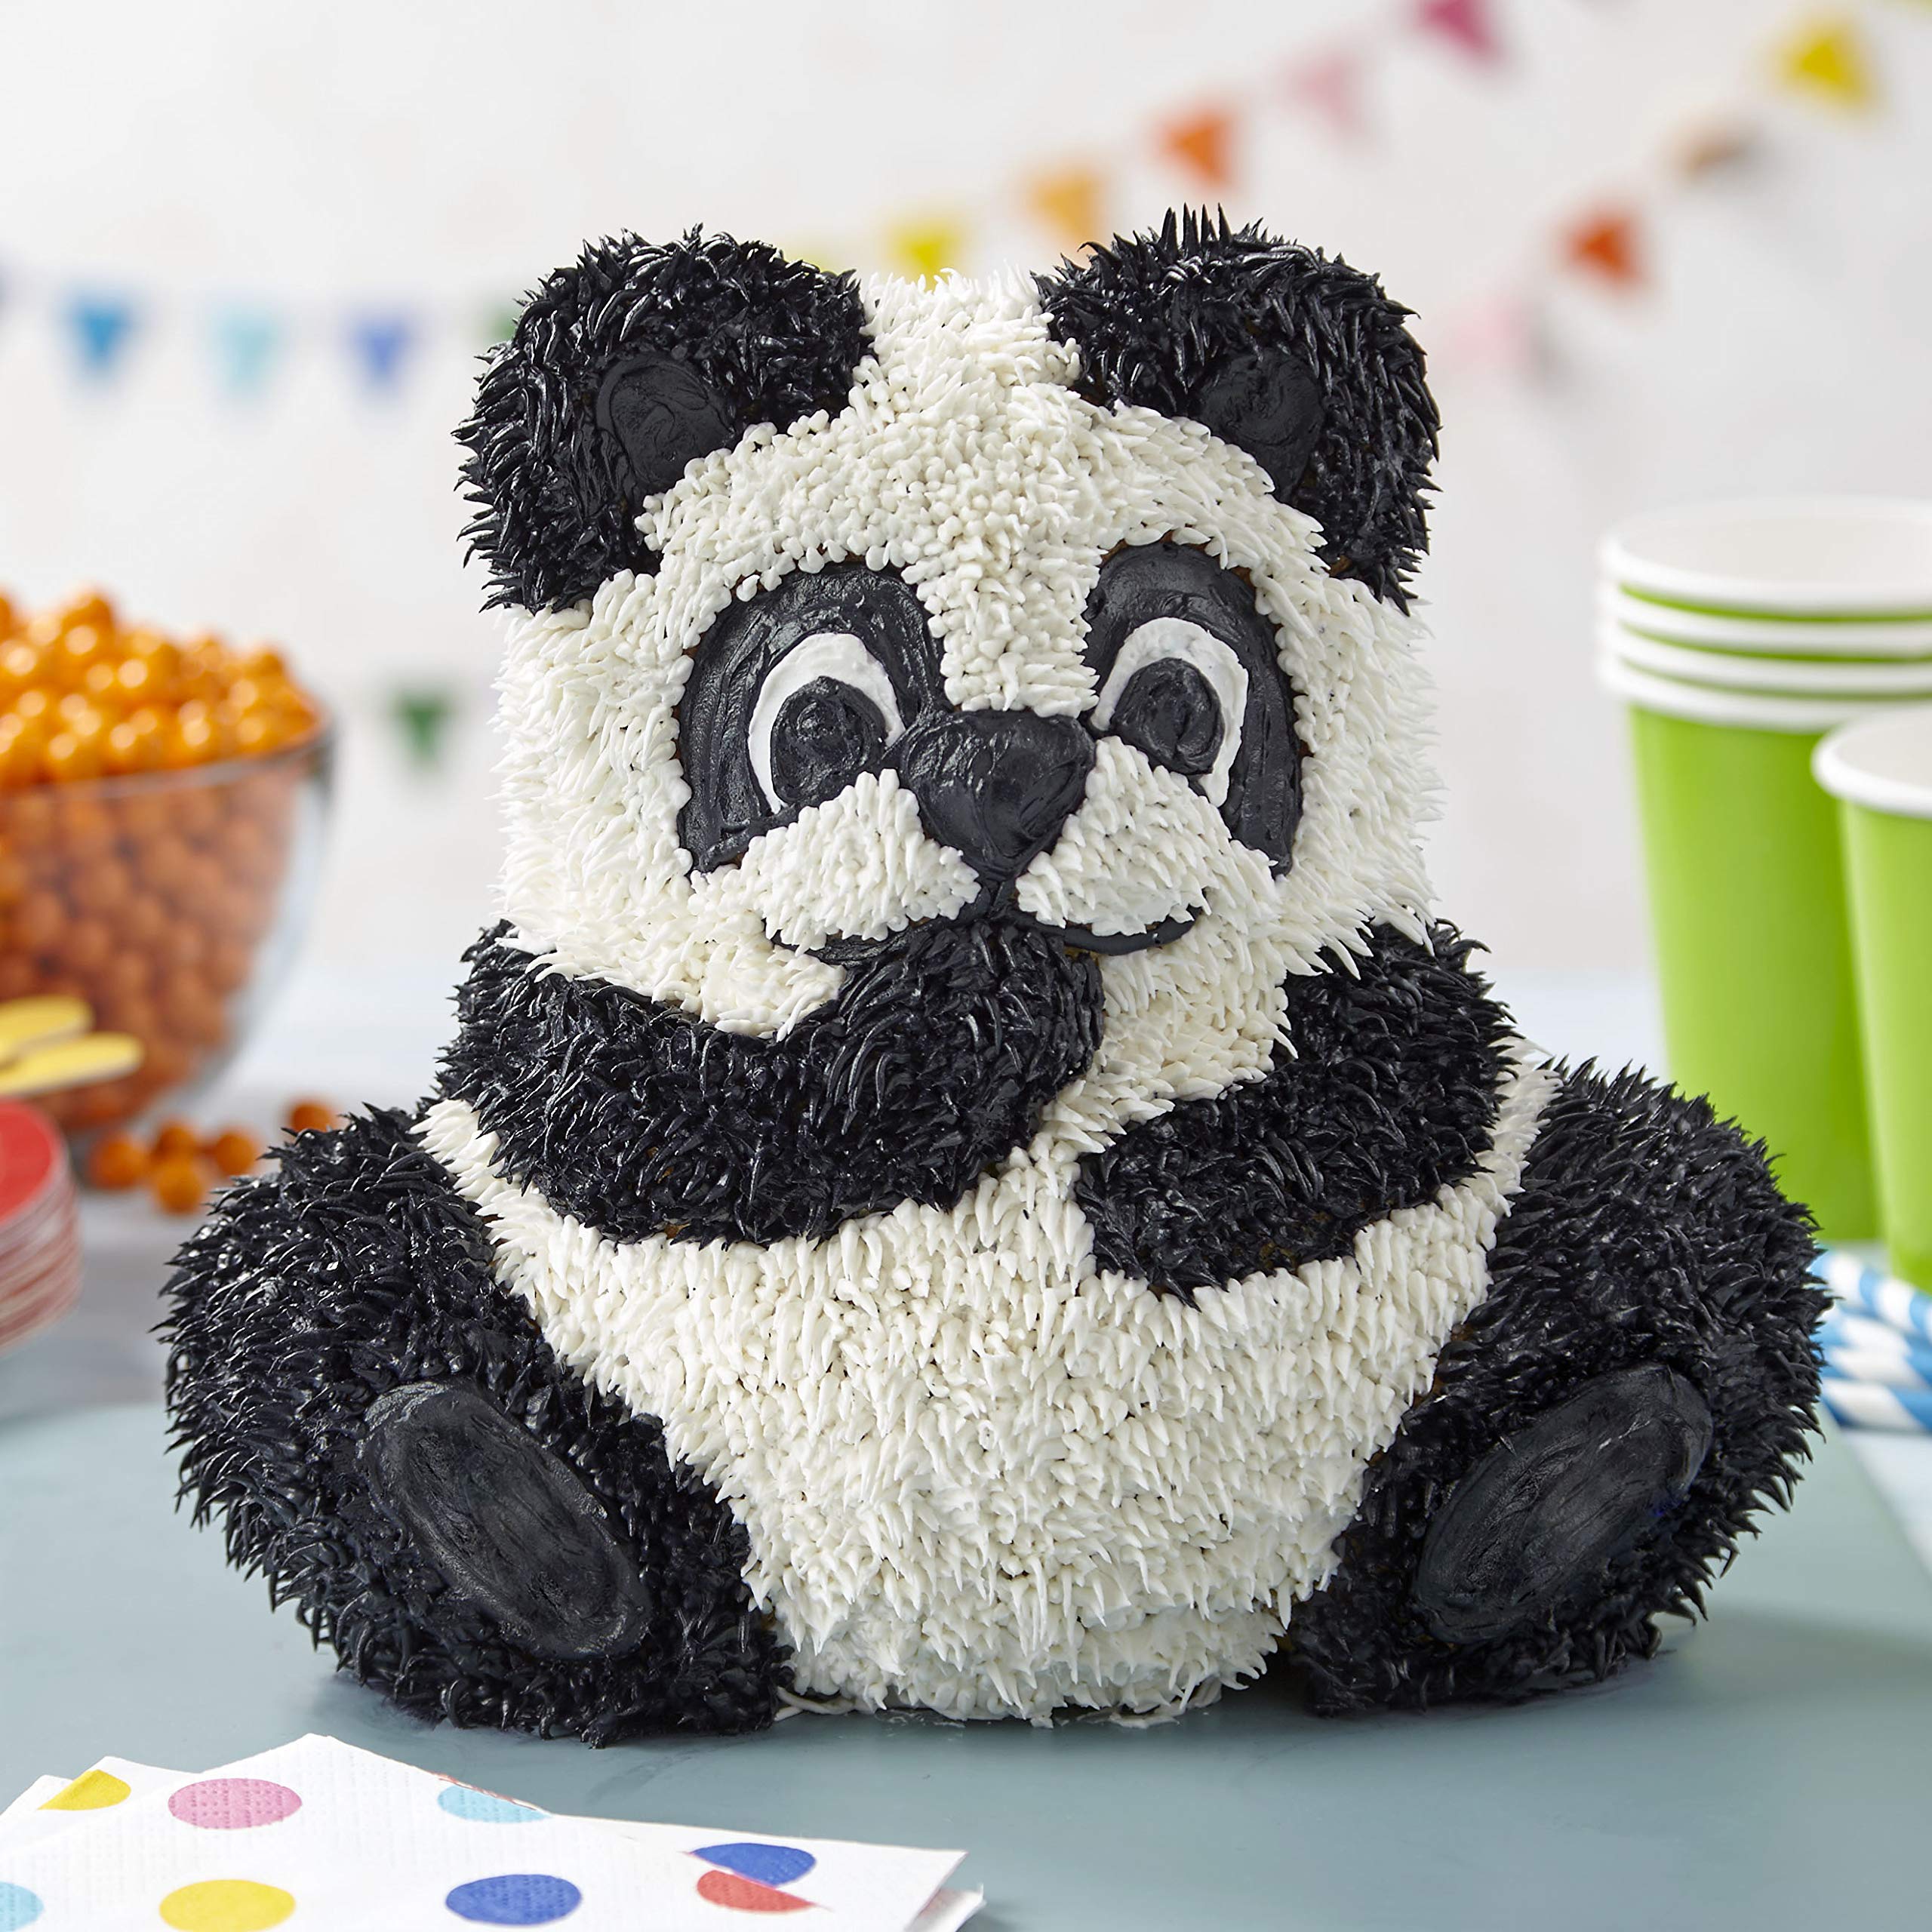 Wilton Teddy Bear 3D Cake Pan Set, a Teddy Bear Made of Cake, Surprise Your Child with a Birthday Cake to Remember, Decorate it Like a Panda or Your Favorite Lovable Bear, 2-Piece